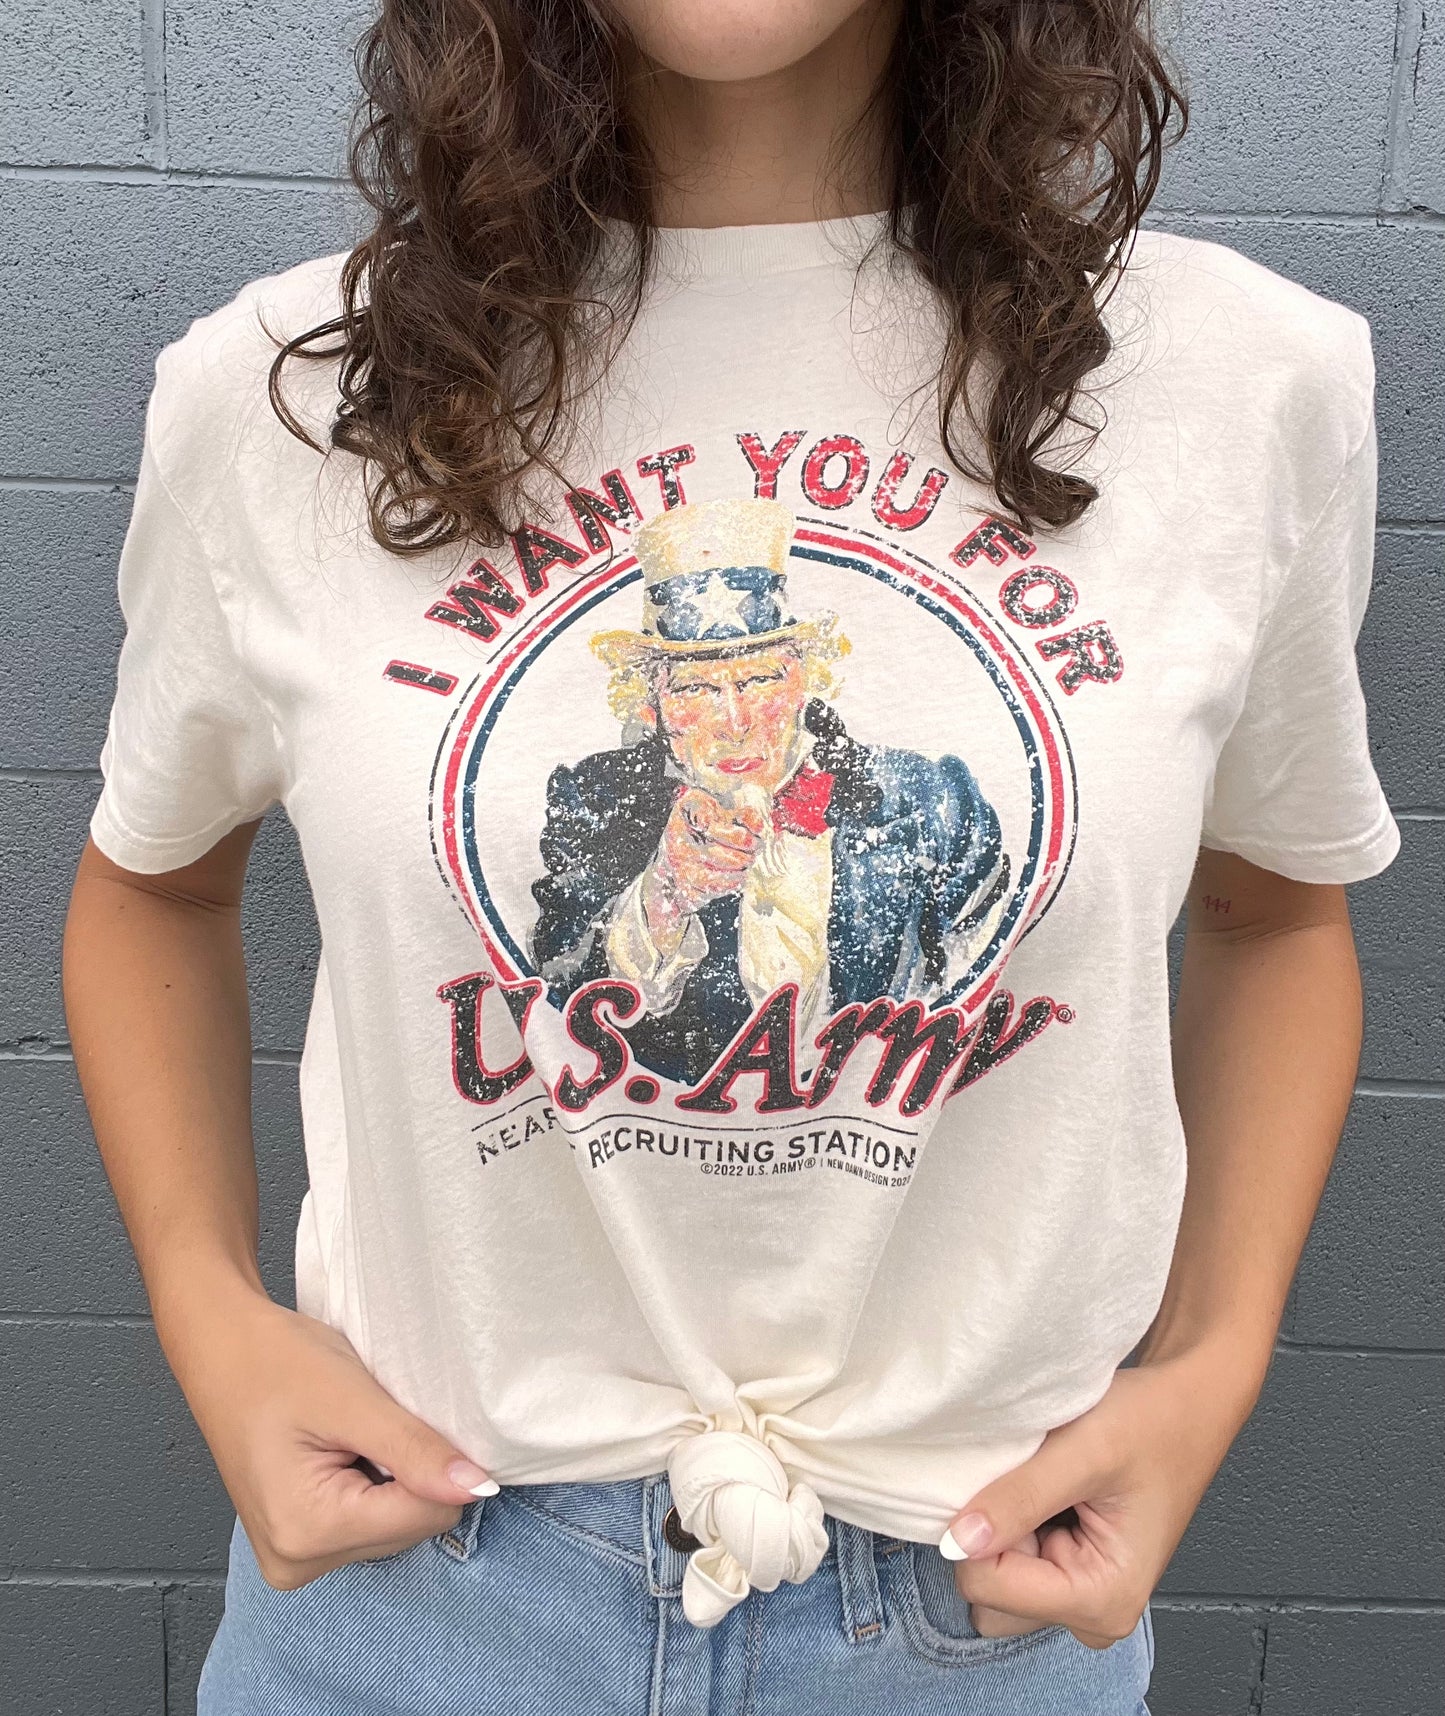 Uncle Sam | I want YOU for U.S. Army ® | Historical War Poster | Vintage Natural Unisex Tee